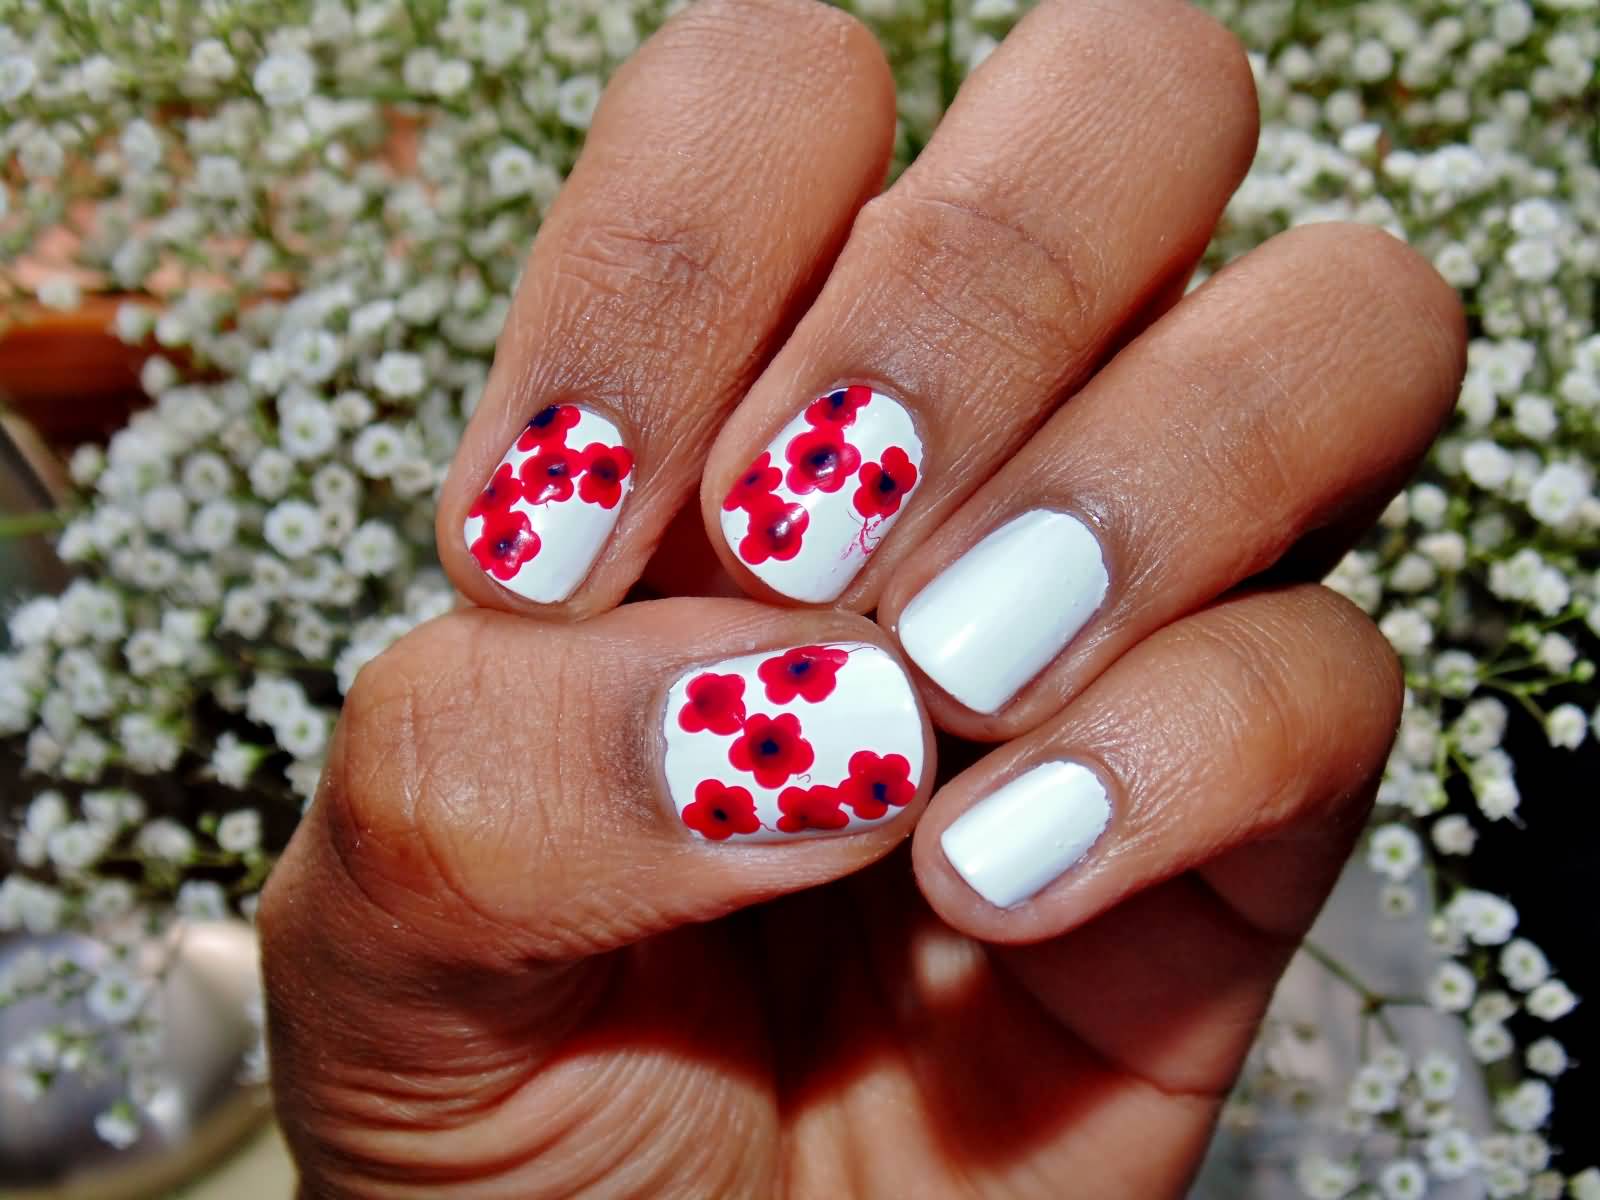 White Nails With Red Flowers Design Nail Art